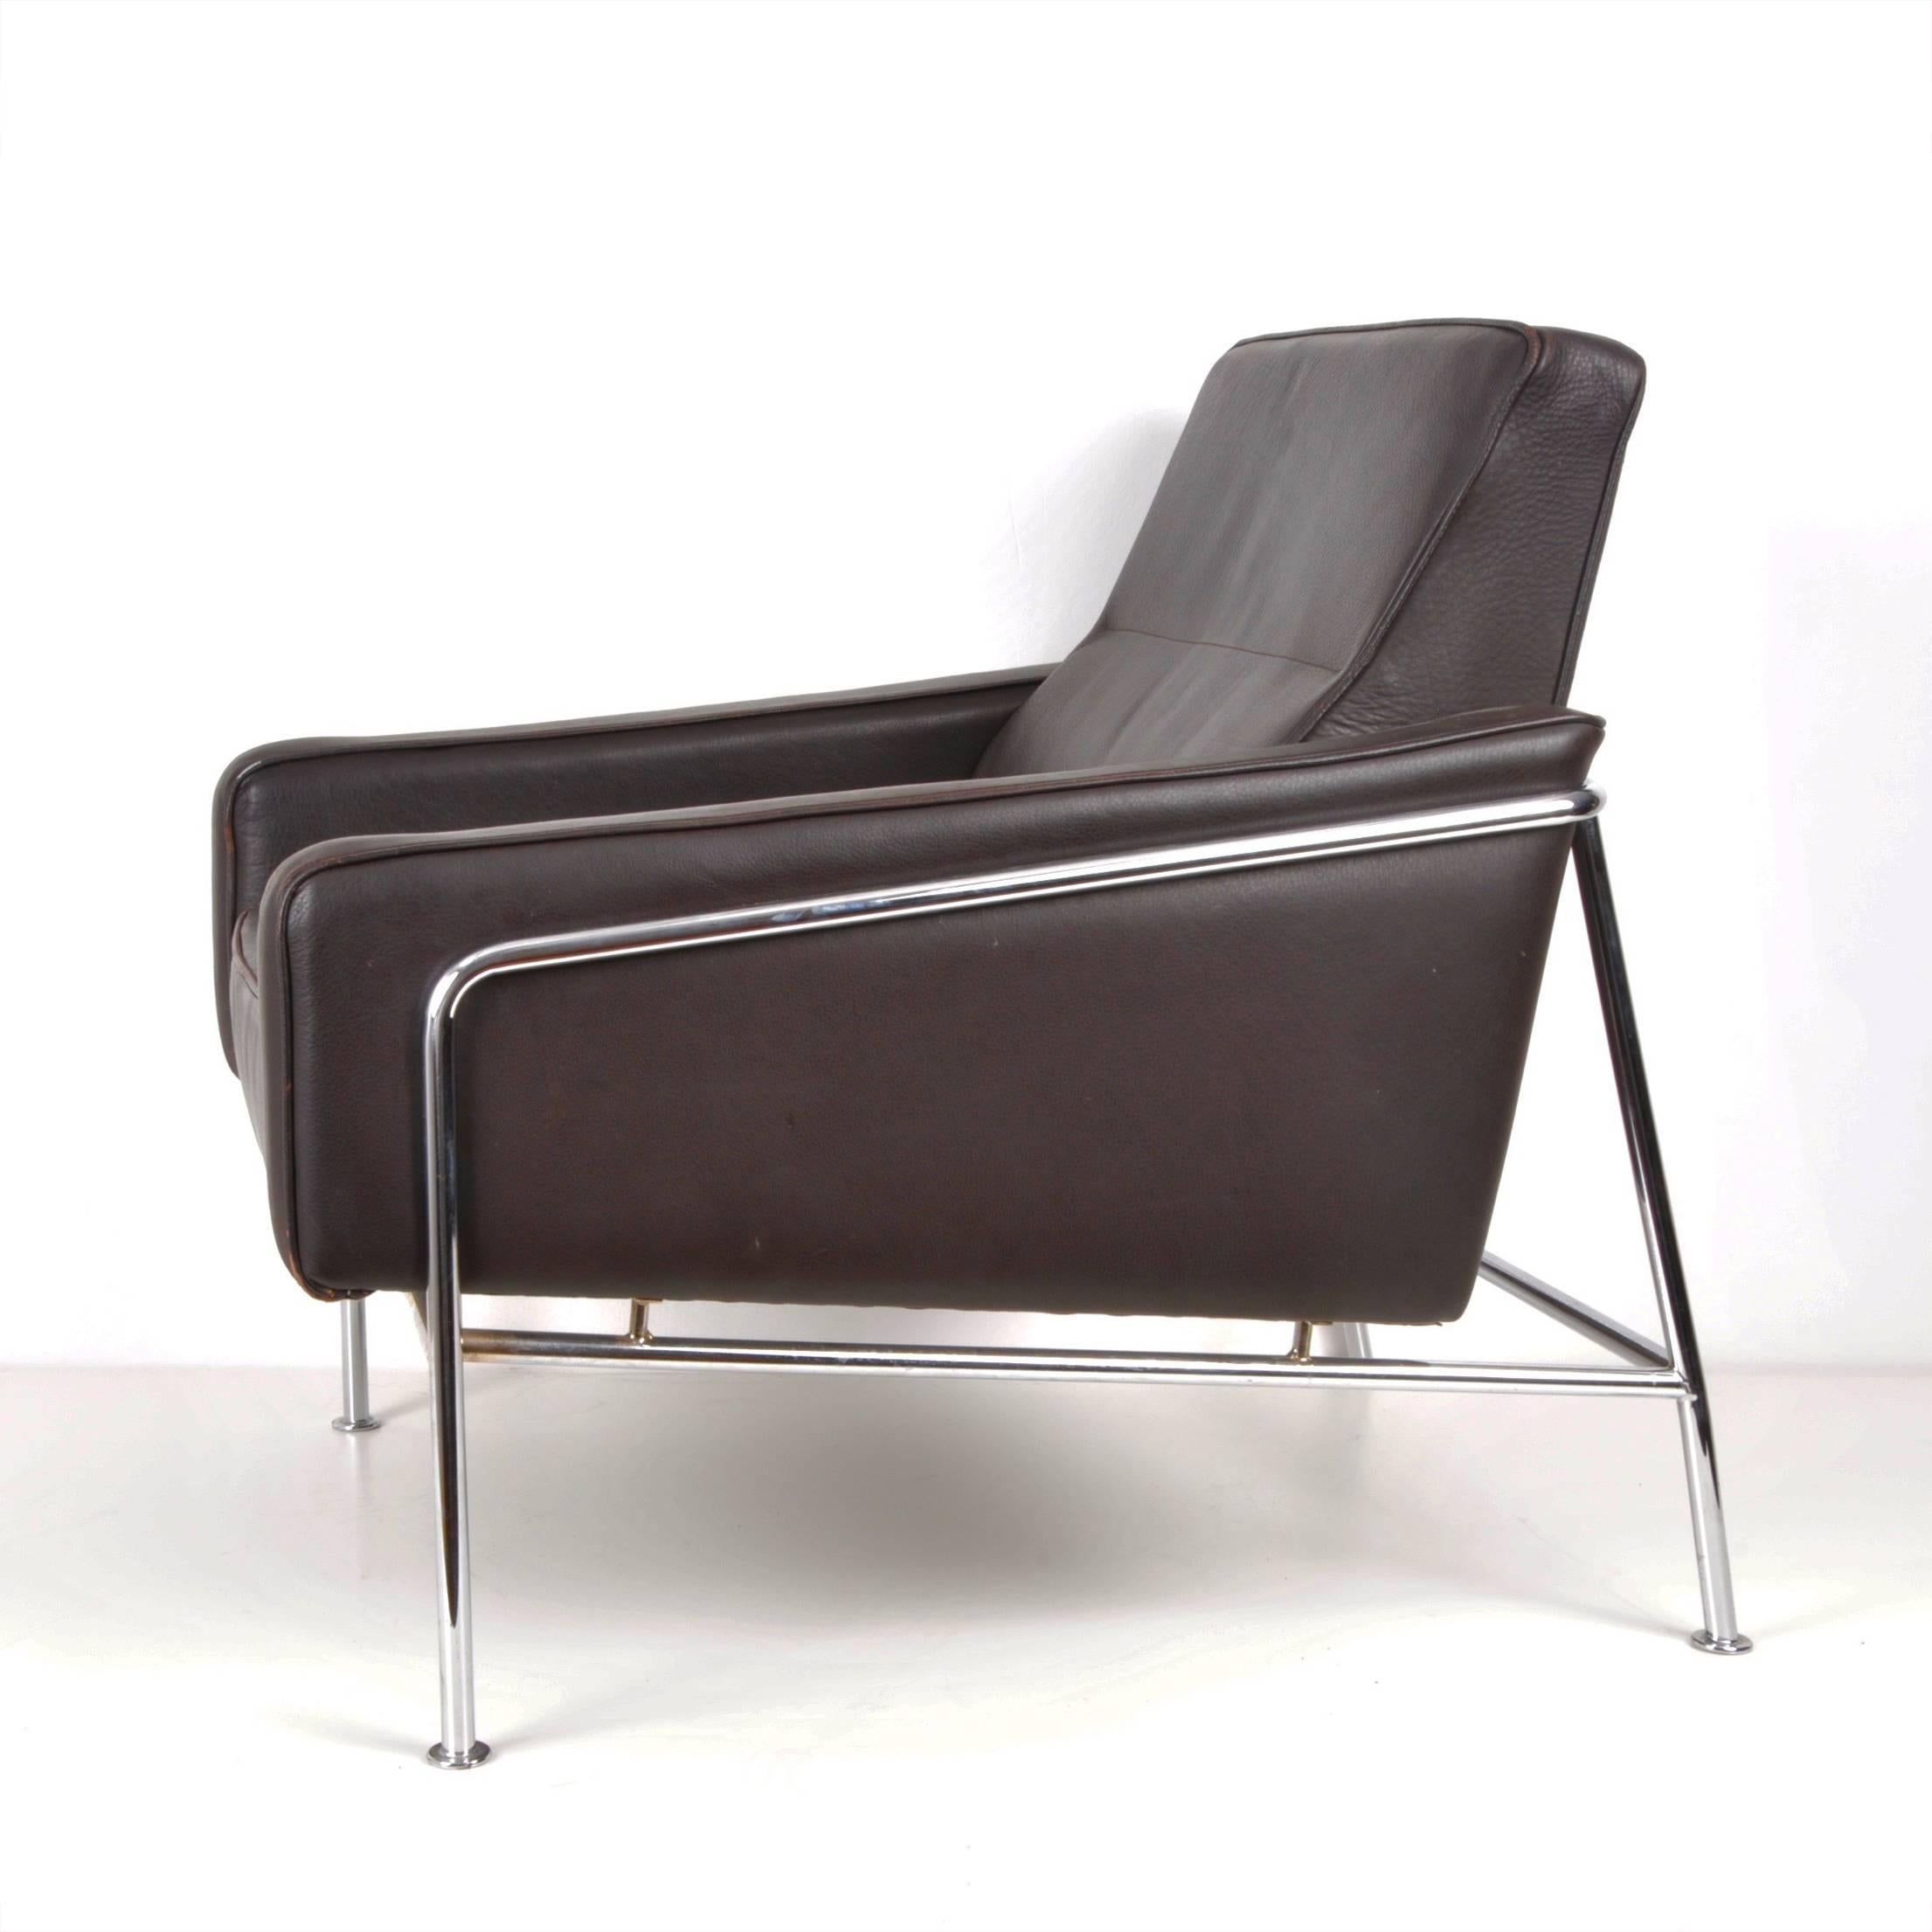 Midcentury Dark Brown Leather Lounge Chair Attributed to Arne Jacobsen, 1956 In Fair Condition For Sale In Roma, IT